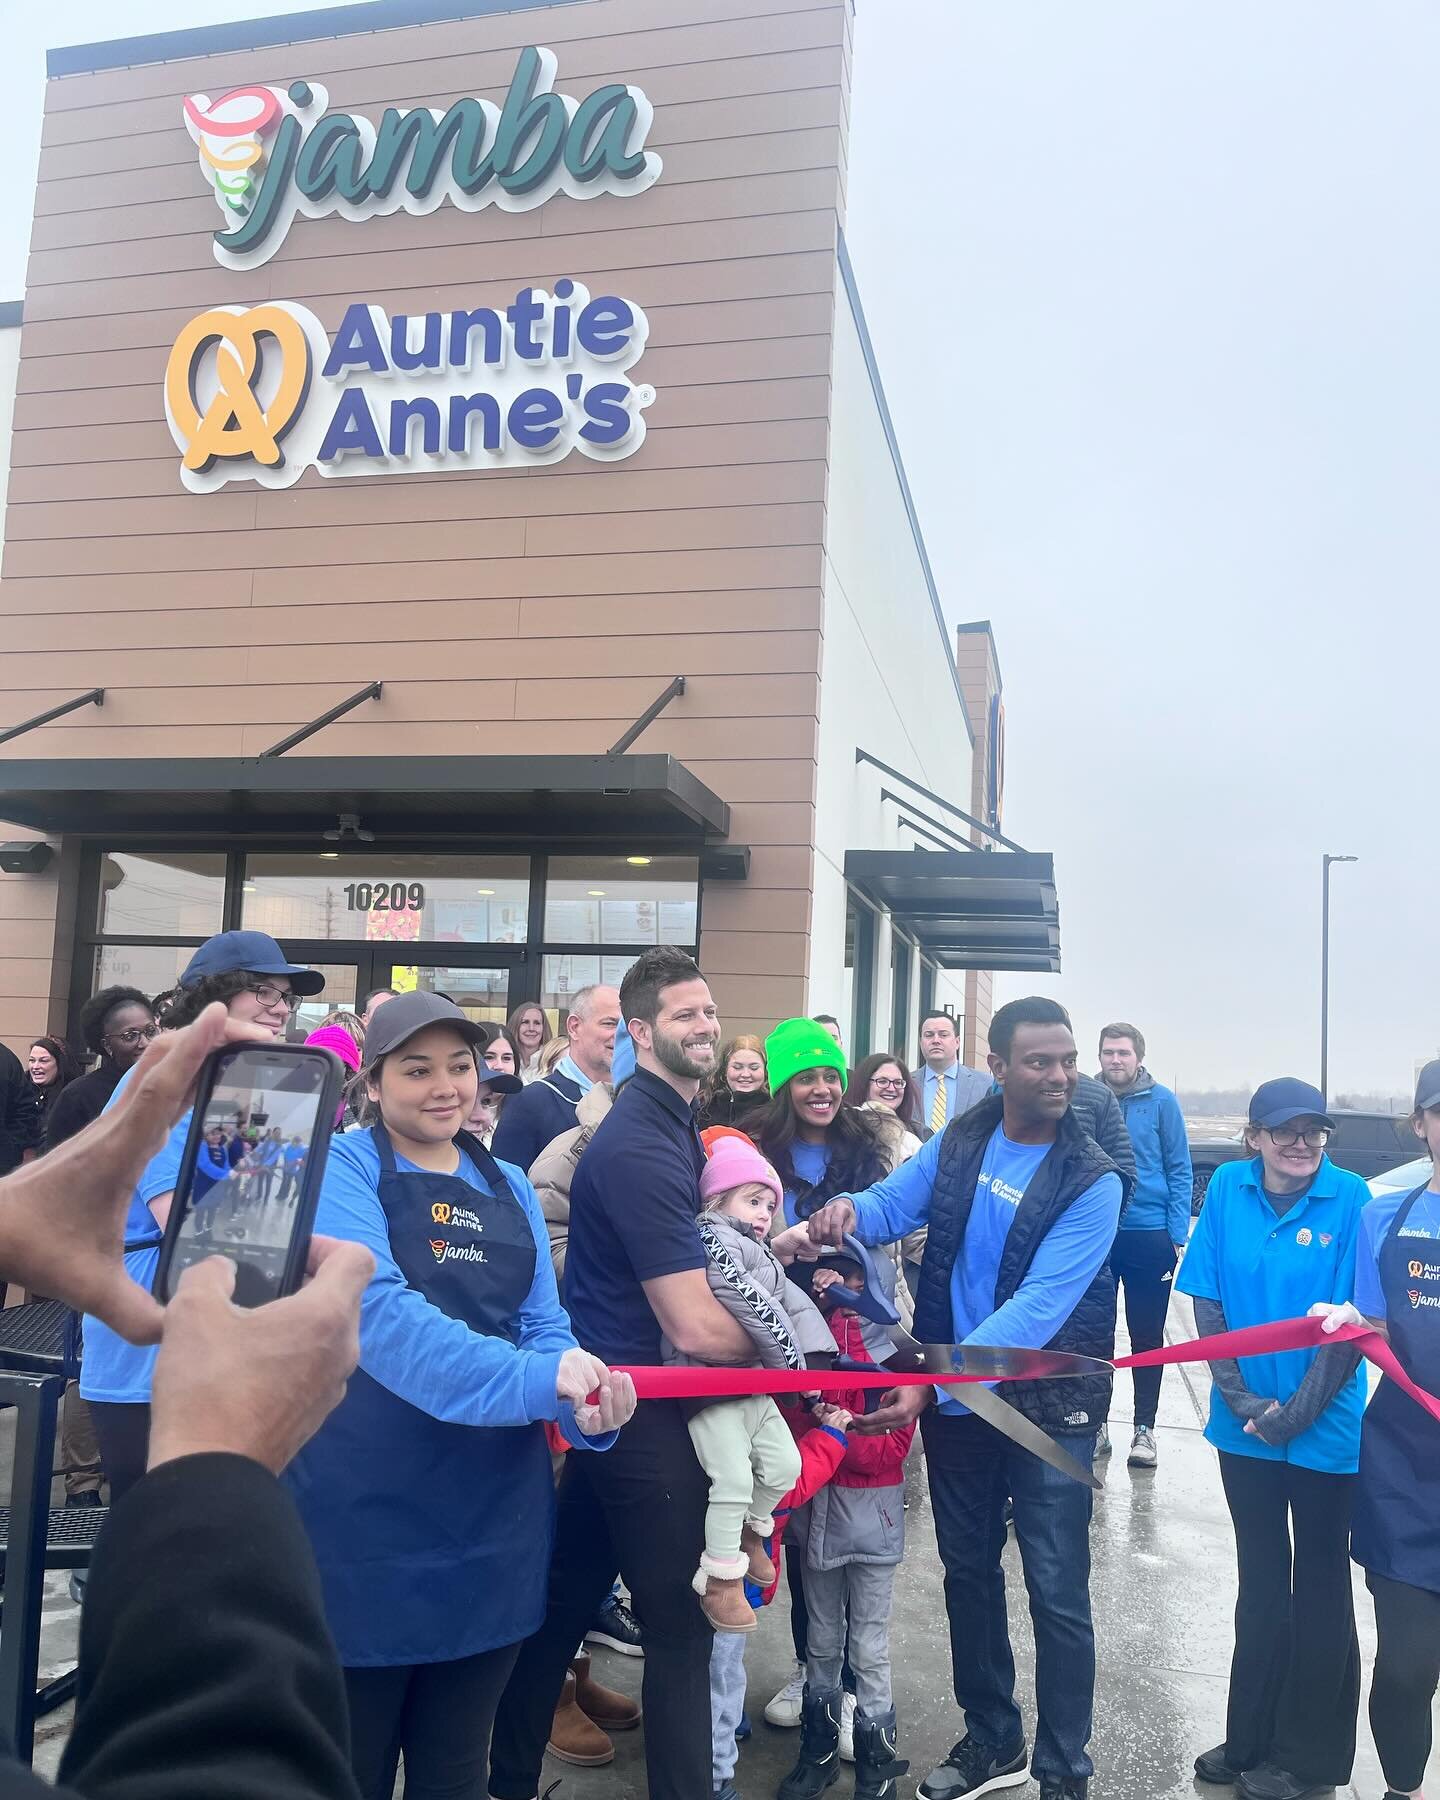 Today we celebrated the ribbon-cutting of our client&rsquo;s newest venture: Jamba and Auntie Anne&rsquo;s at 10209 W 29th St, Wichita. Hats off to Derek, the dynamic owner, for bringing healthy and delicious options to our community. Swing by for fr